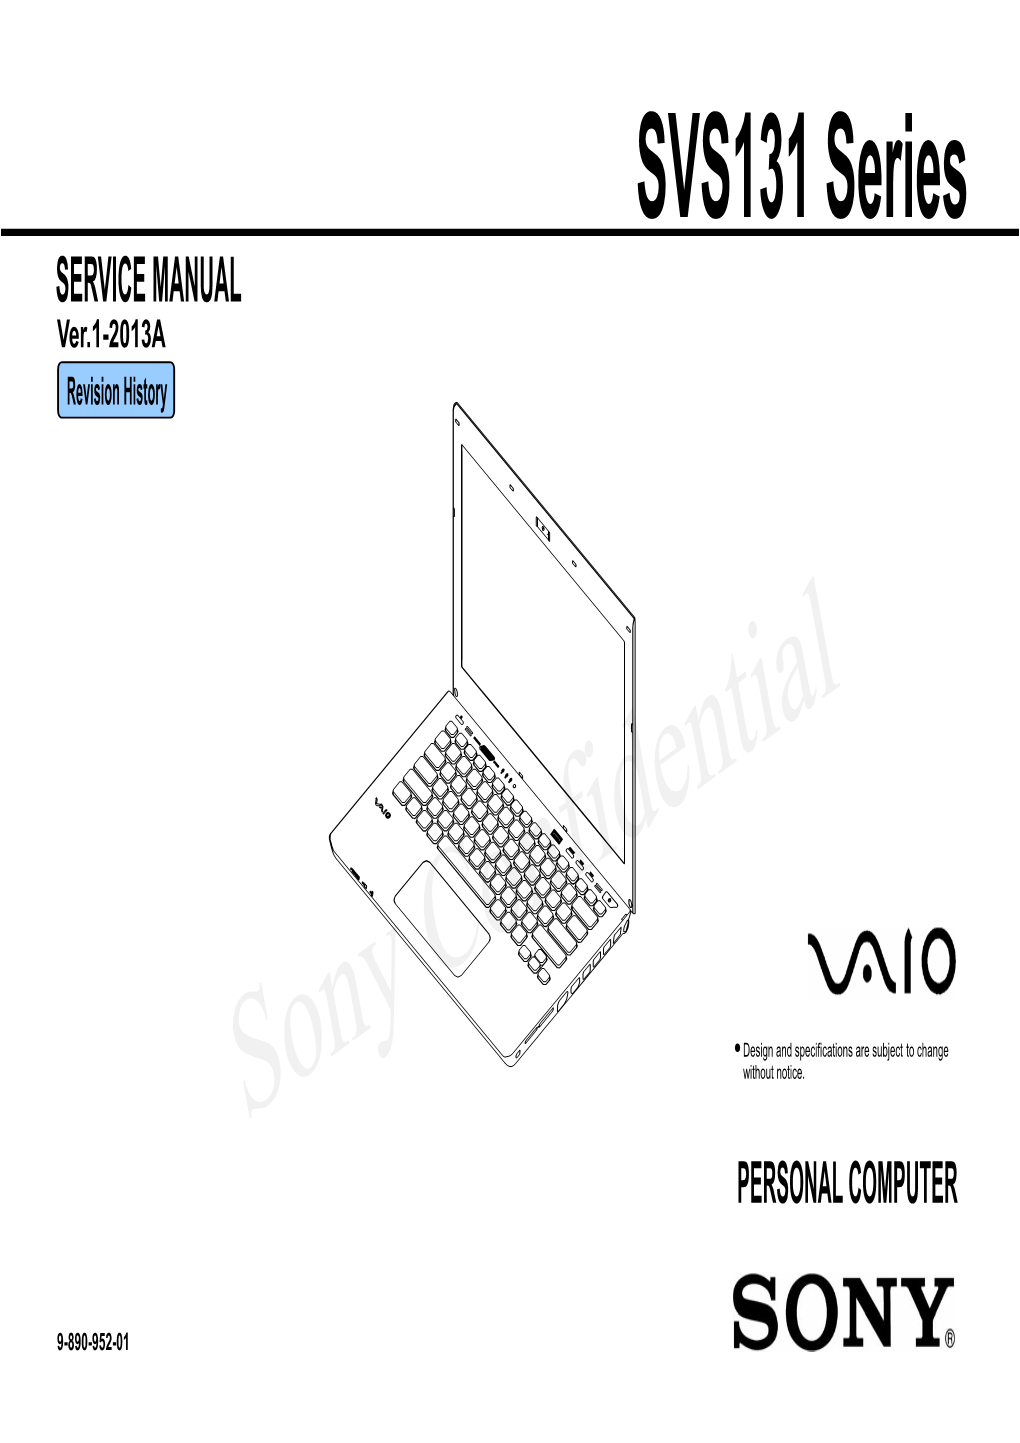 SVS131 Series Sony Confidential Confidential Sony Revision History Ver.1-2013A Ver.1-2013A 9-890-952-01 SERVICE MANUAL SERVICE